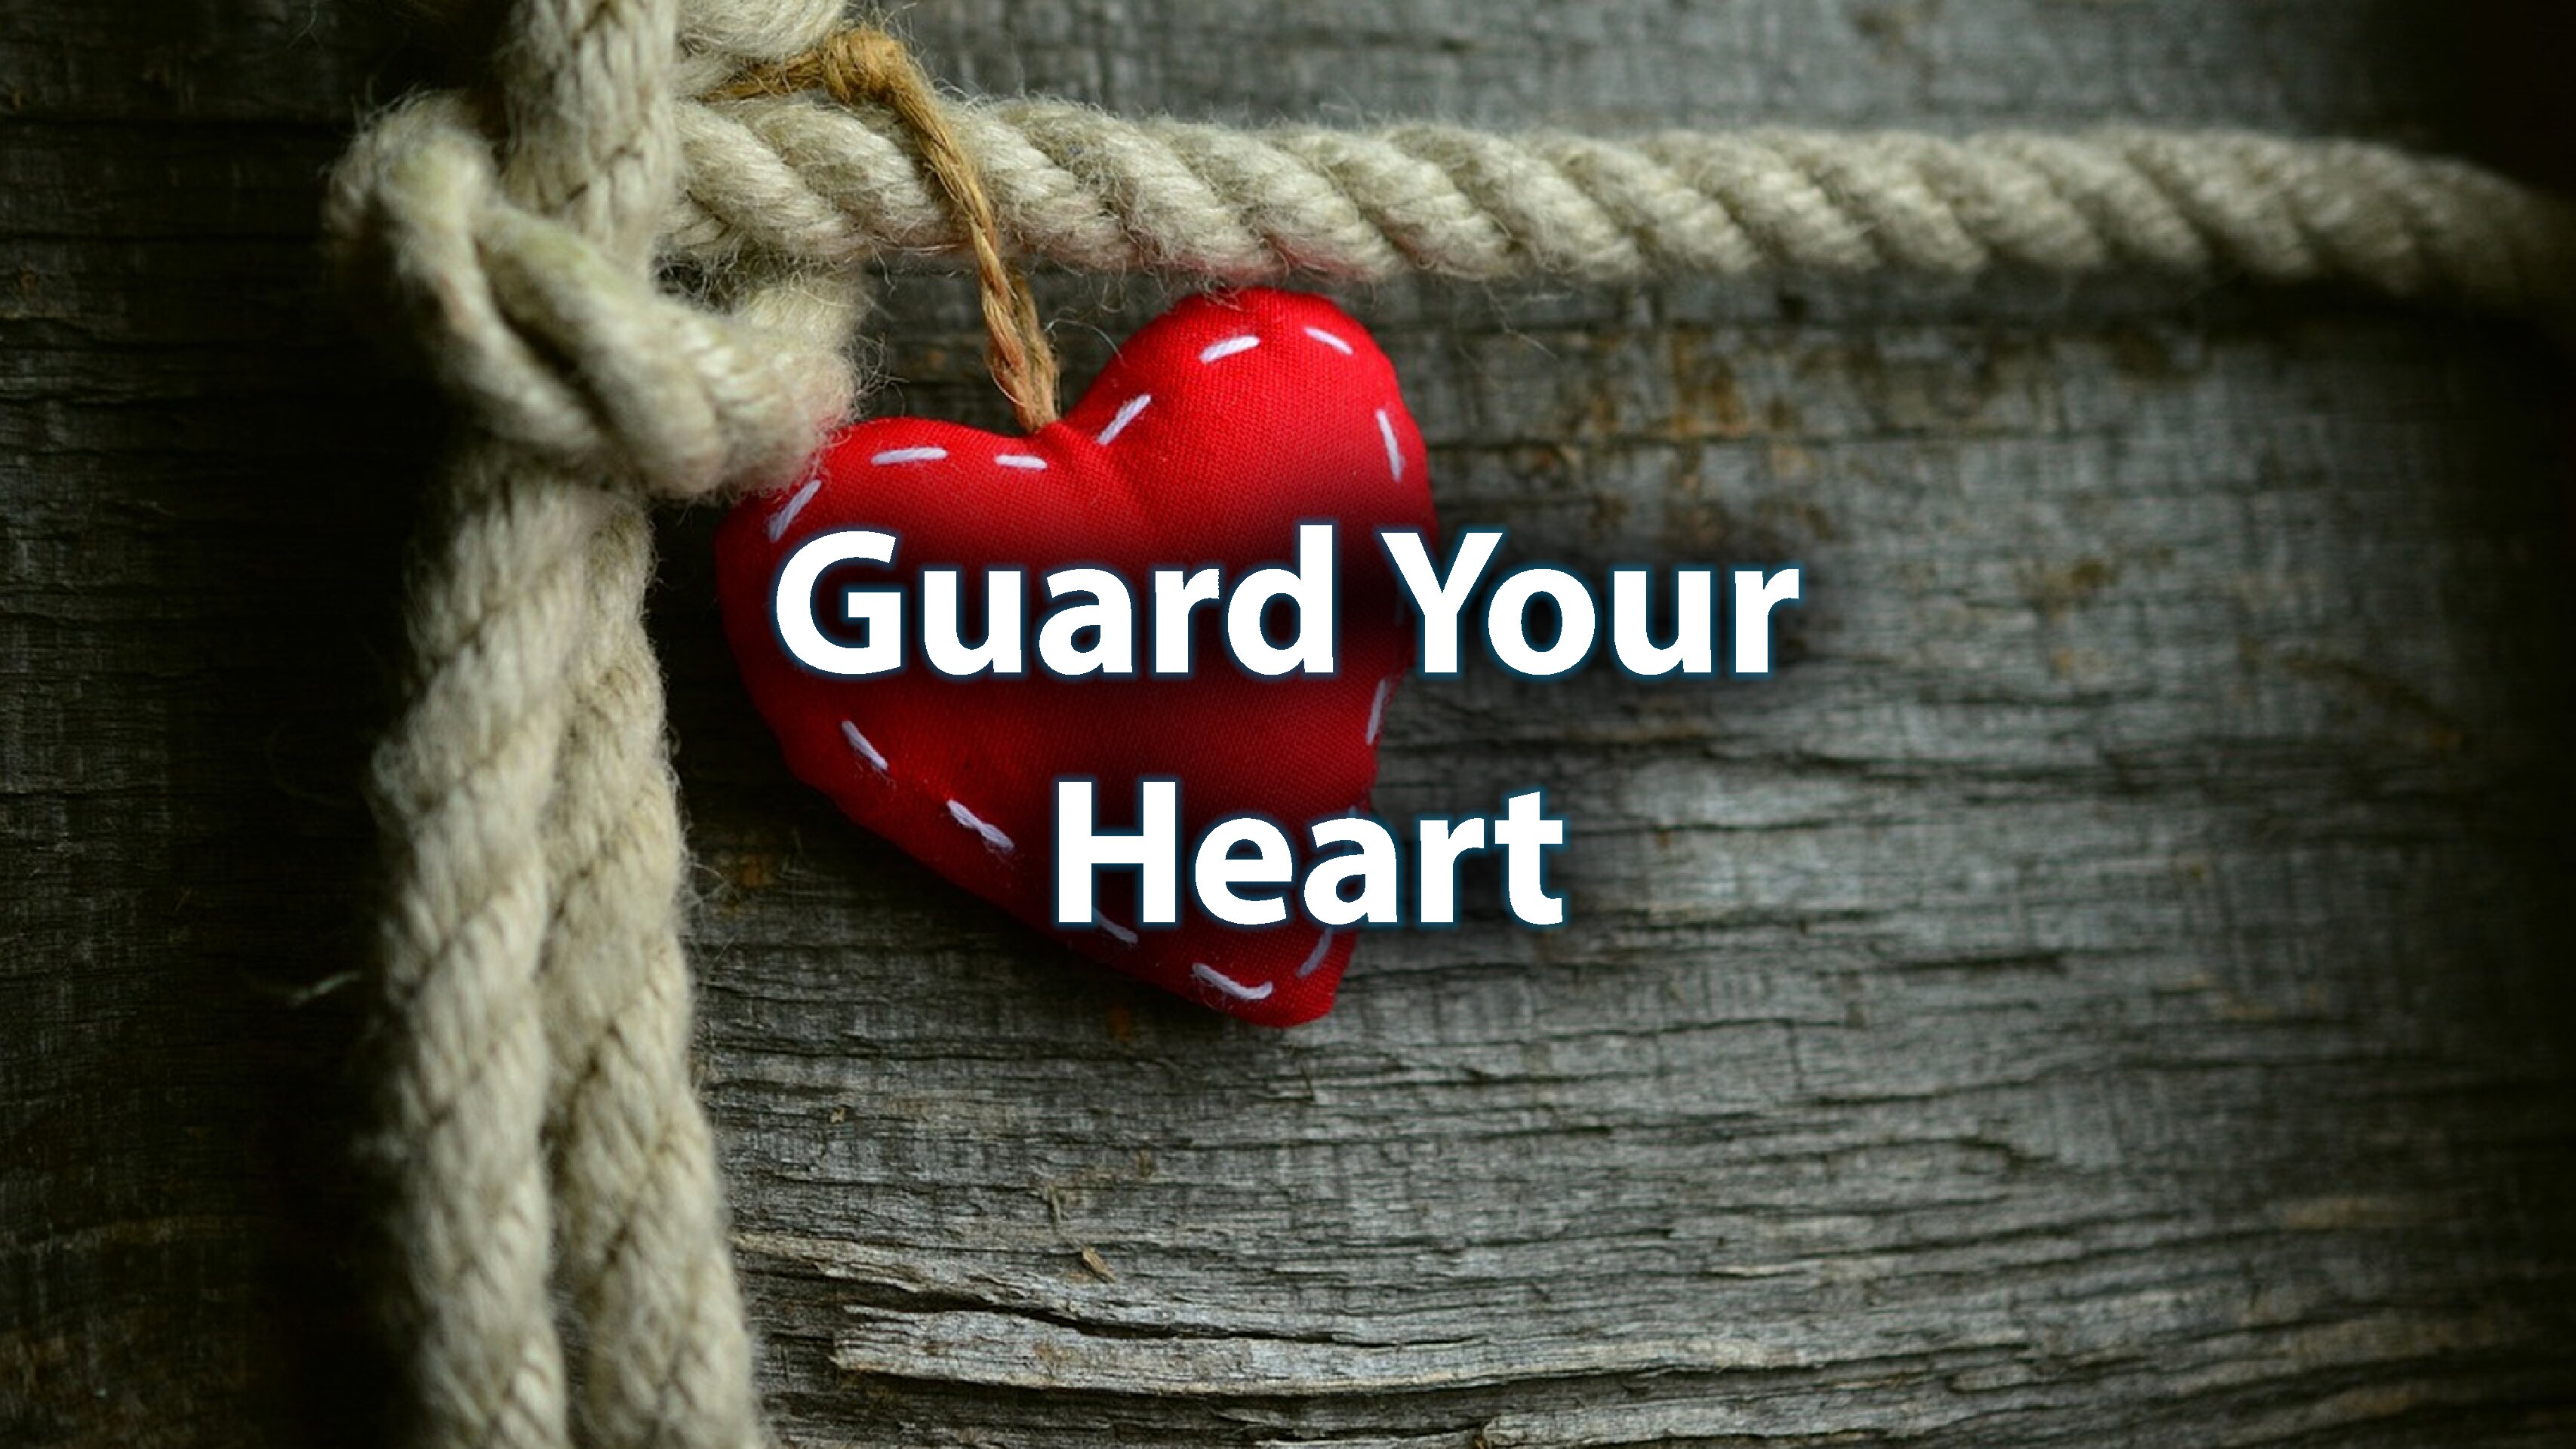 Day 19: Guard Your Heart